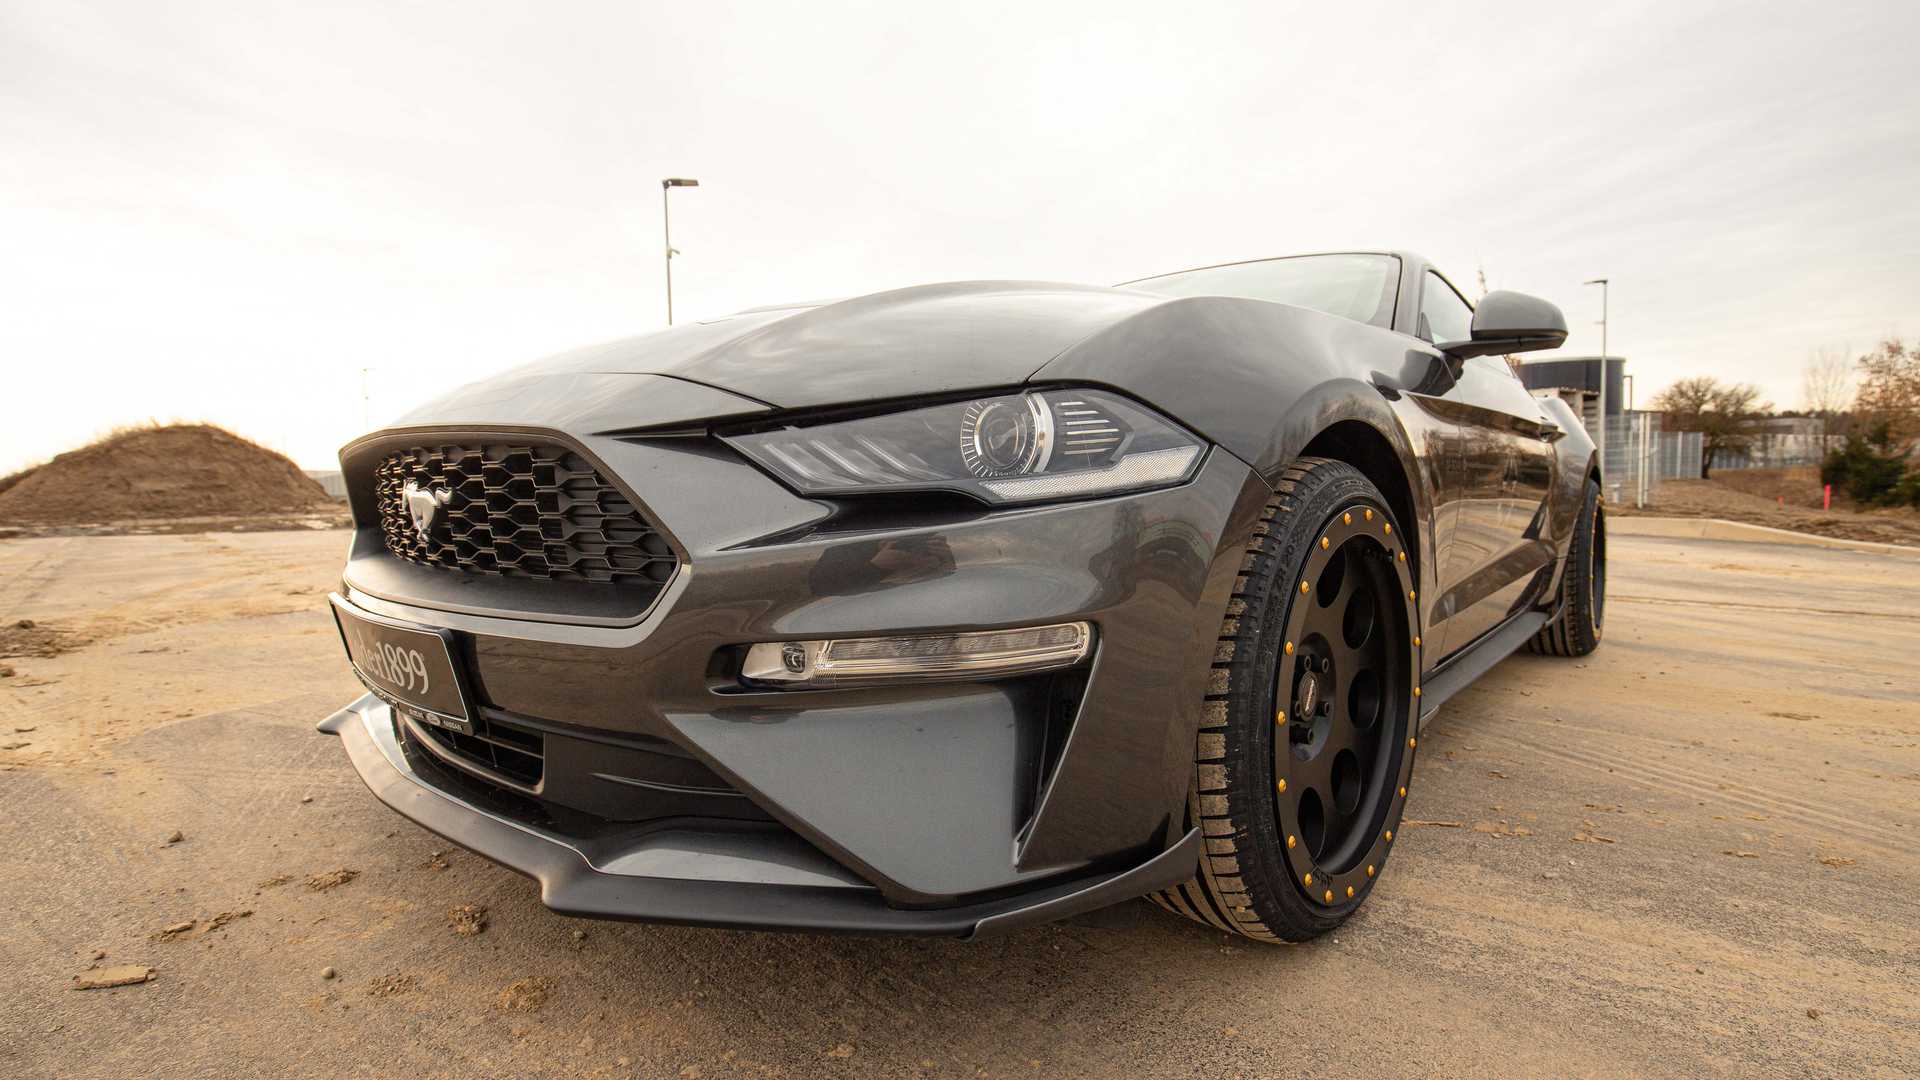 Loder1899 Offers One Last Take on the Ford Mondeo Mk4